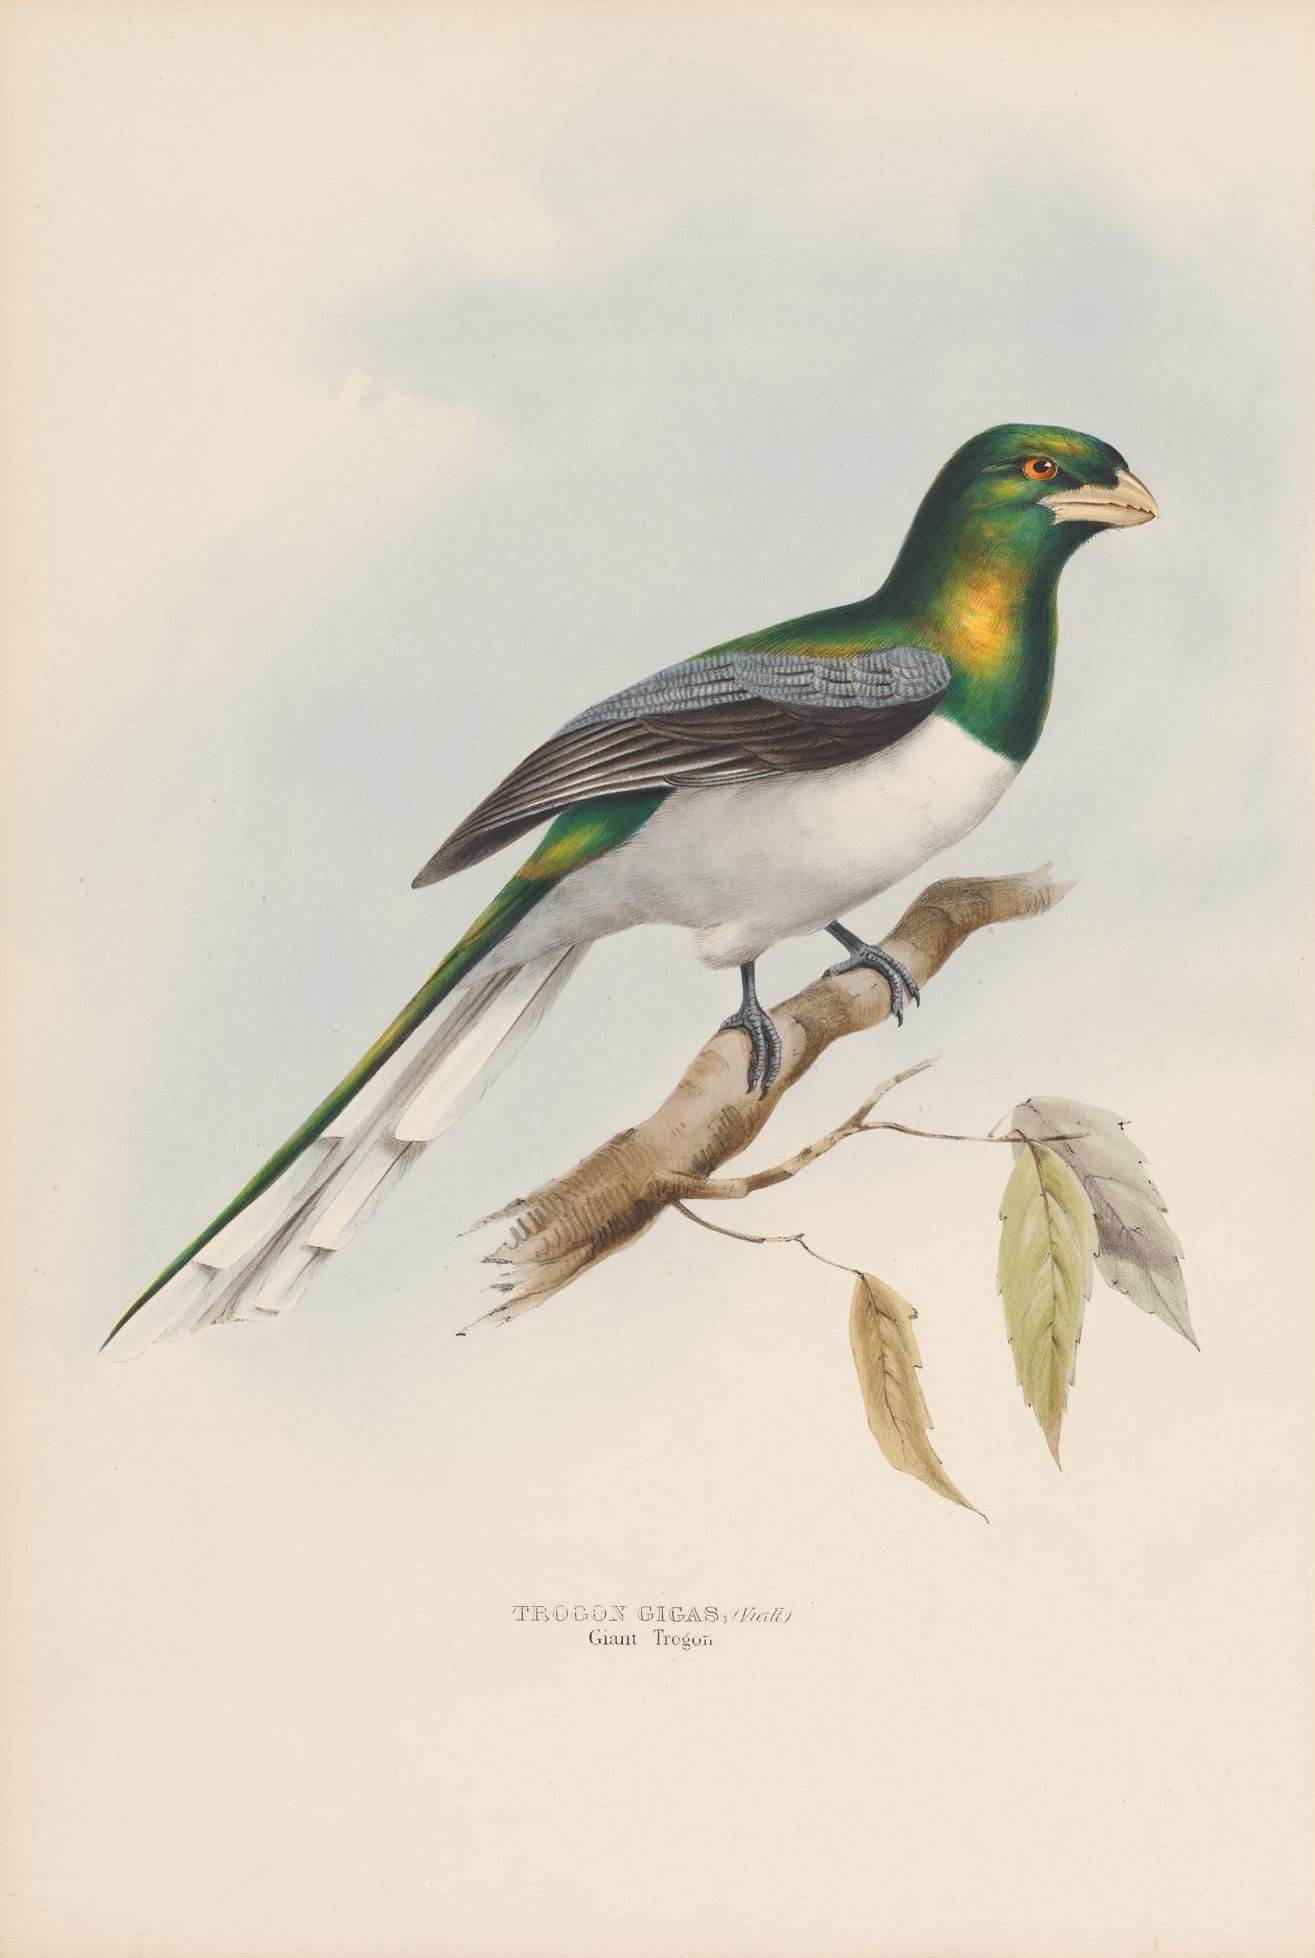 this is a colorized vintage print of a white - fronted bird with green wings